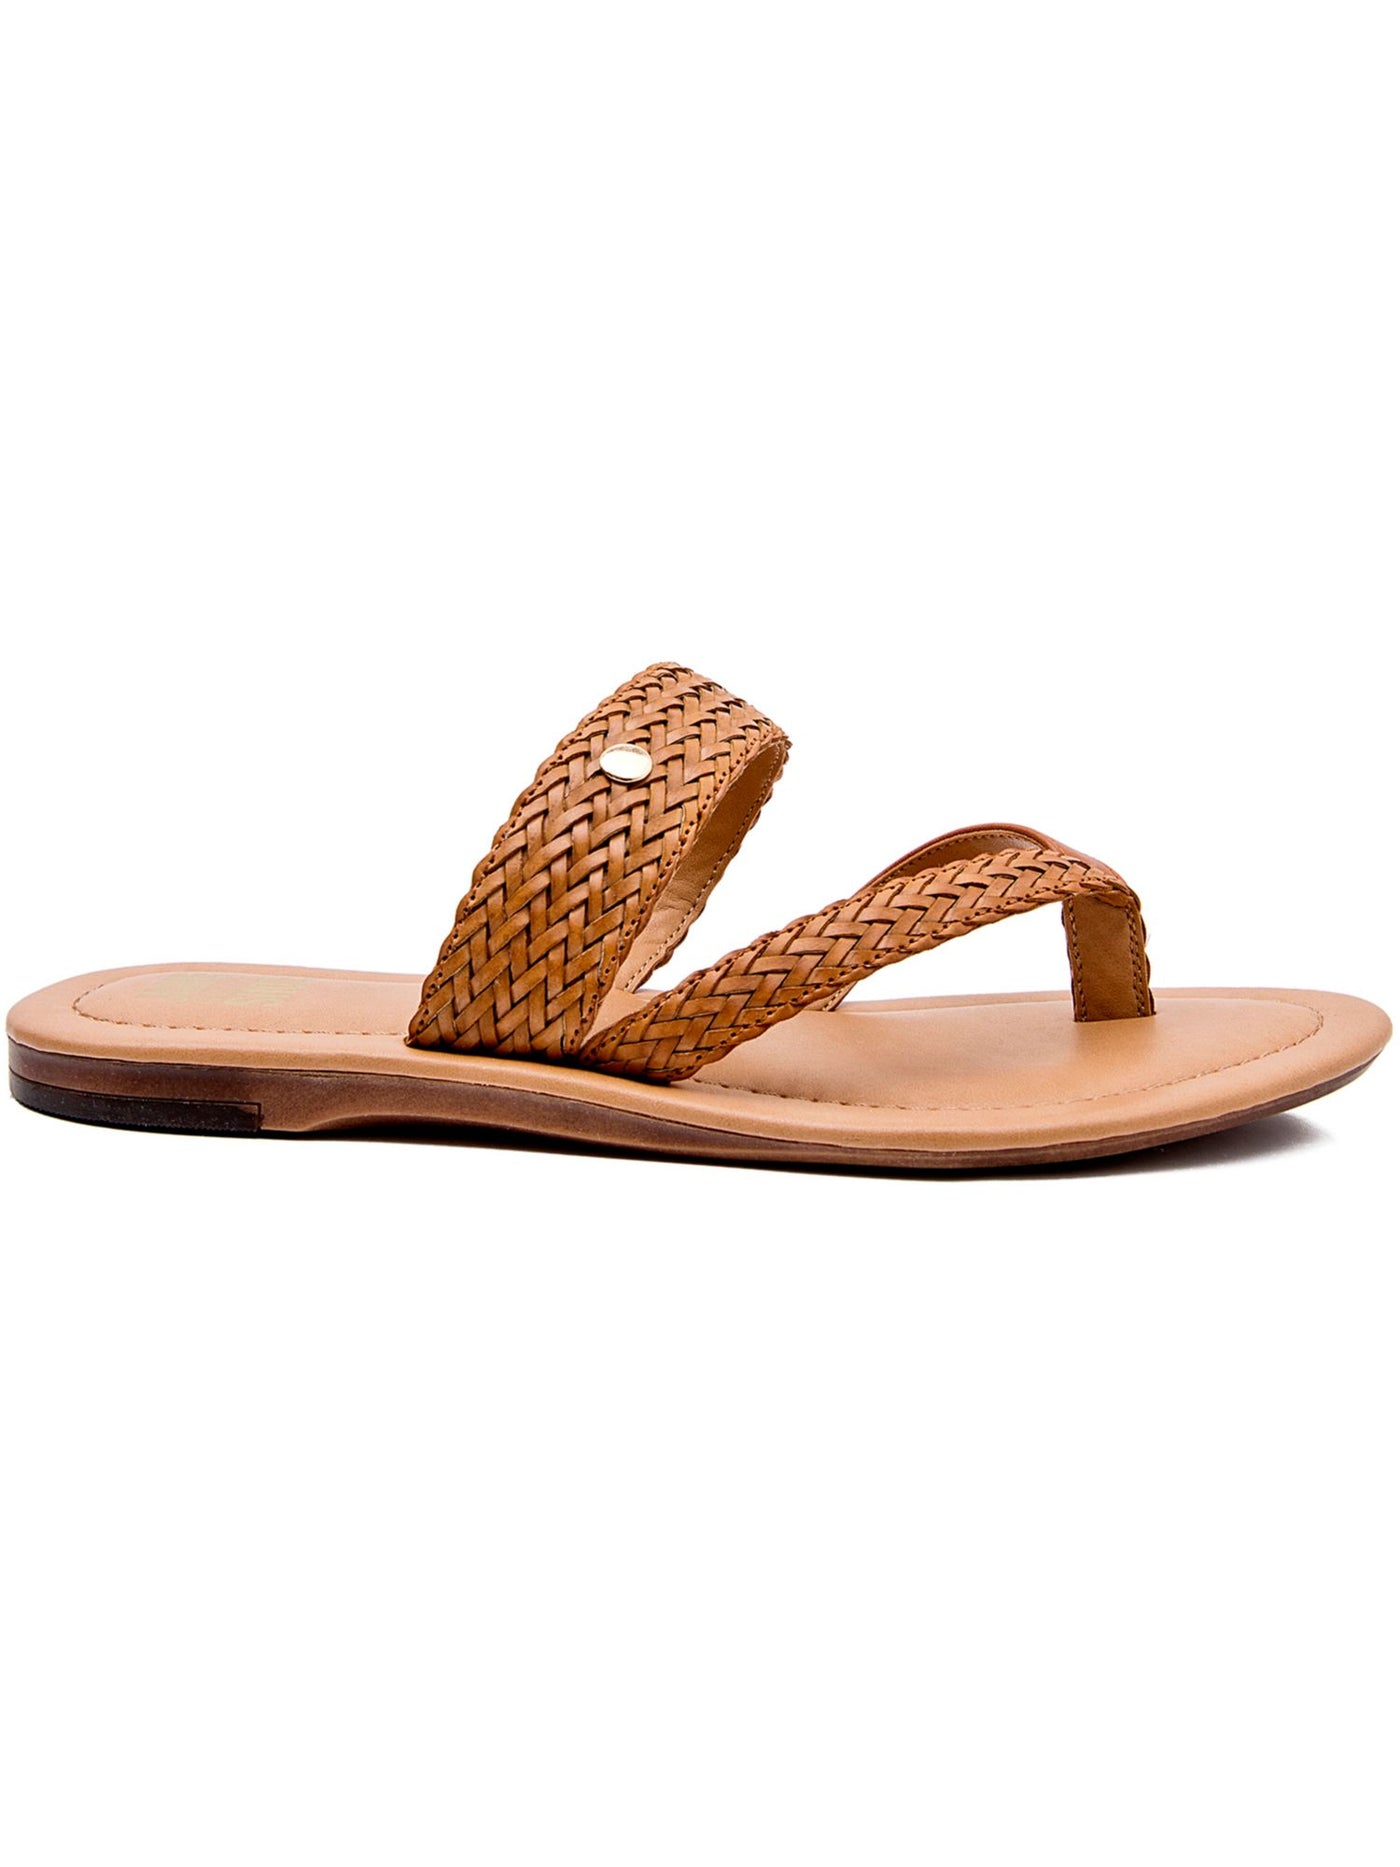 JANE AND THE SHOE Womens Brown Woven Braided Lola Round Toe Slip On Thong Sandals Shoes 6